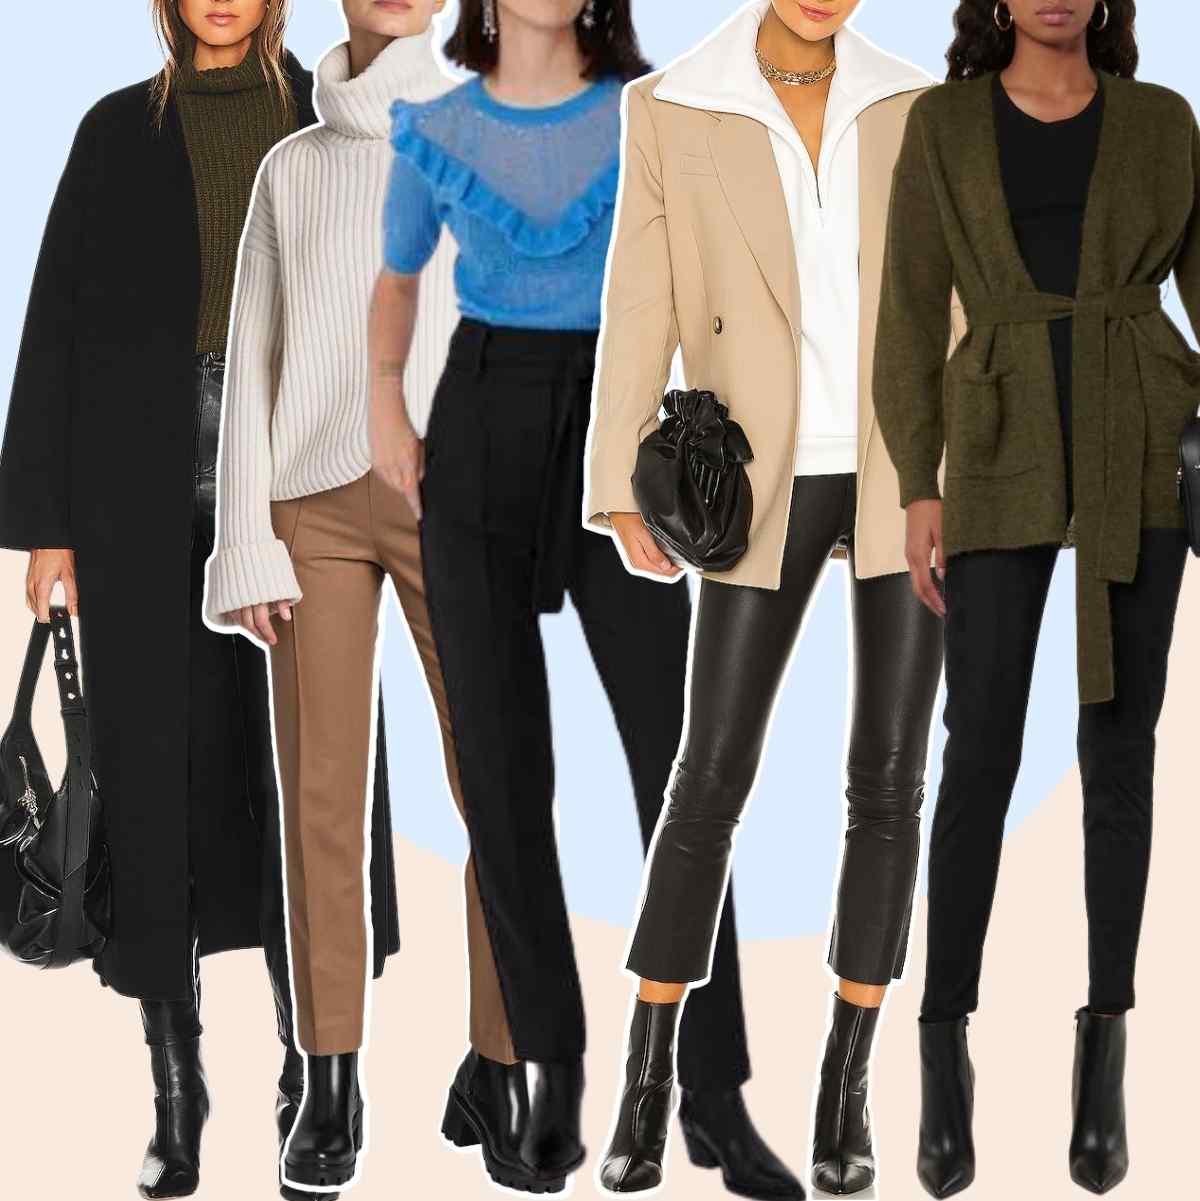 How to Wear Ankle Boots With Your Pants  An easy guide  The Joy of Style